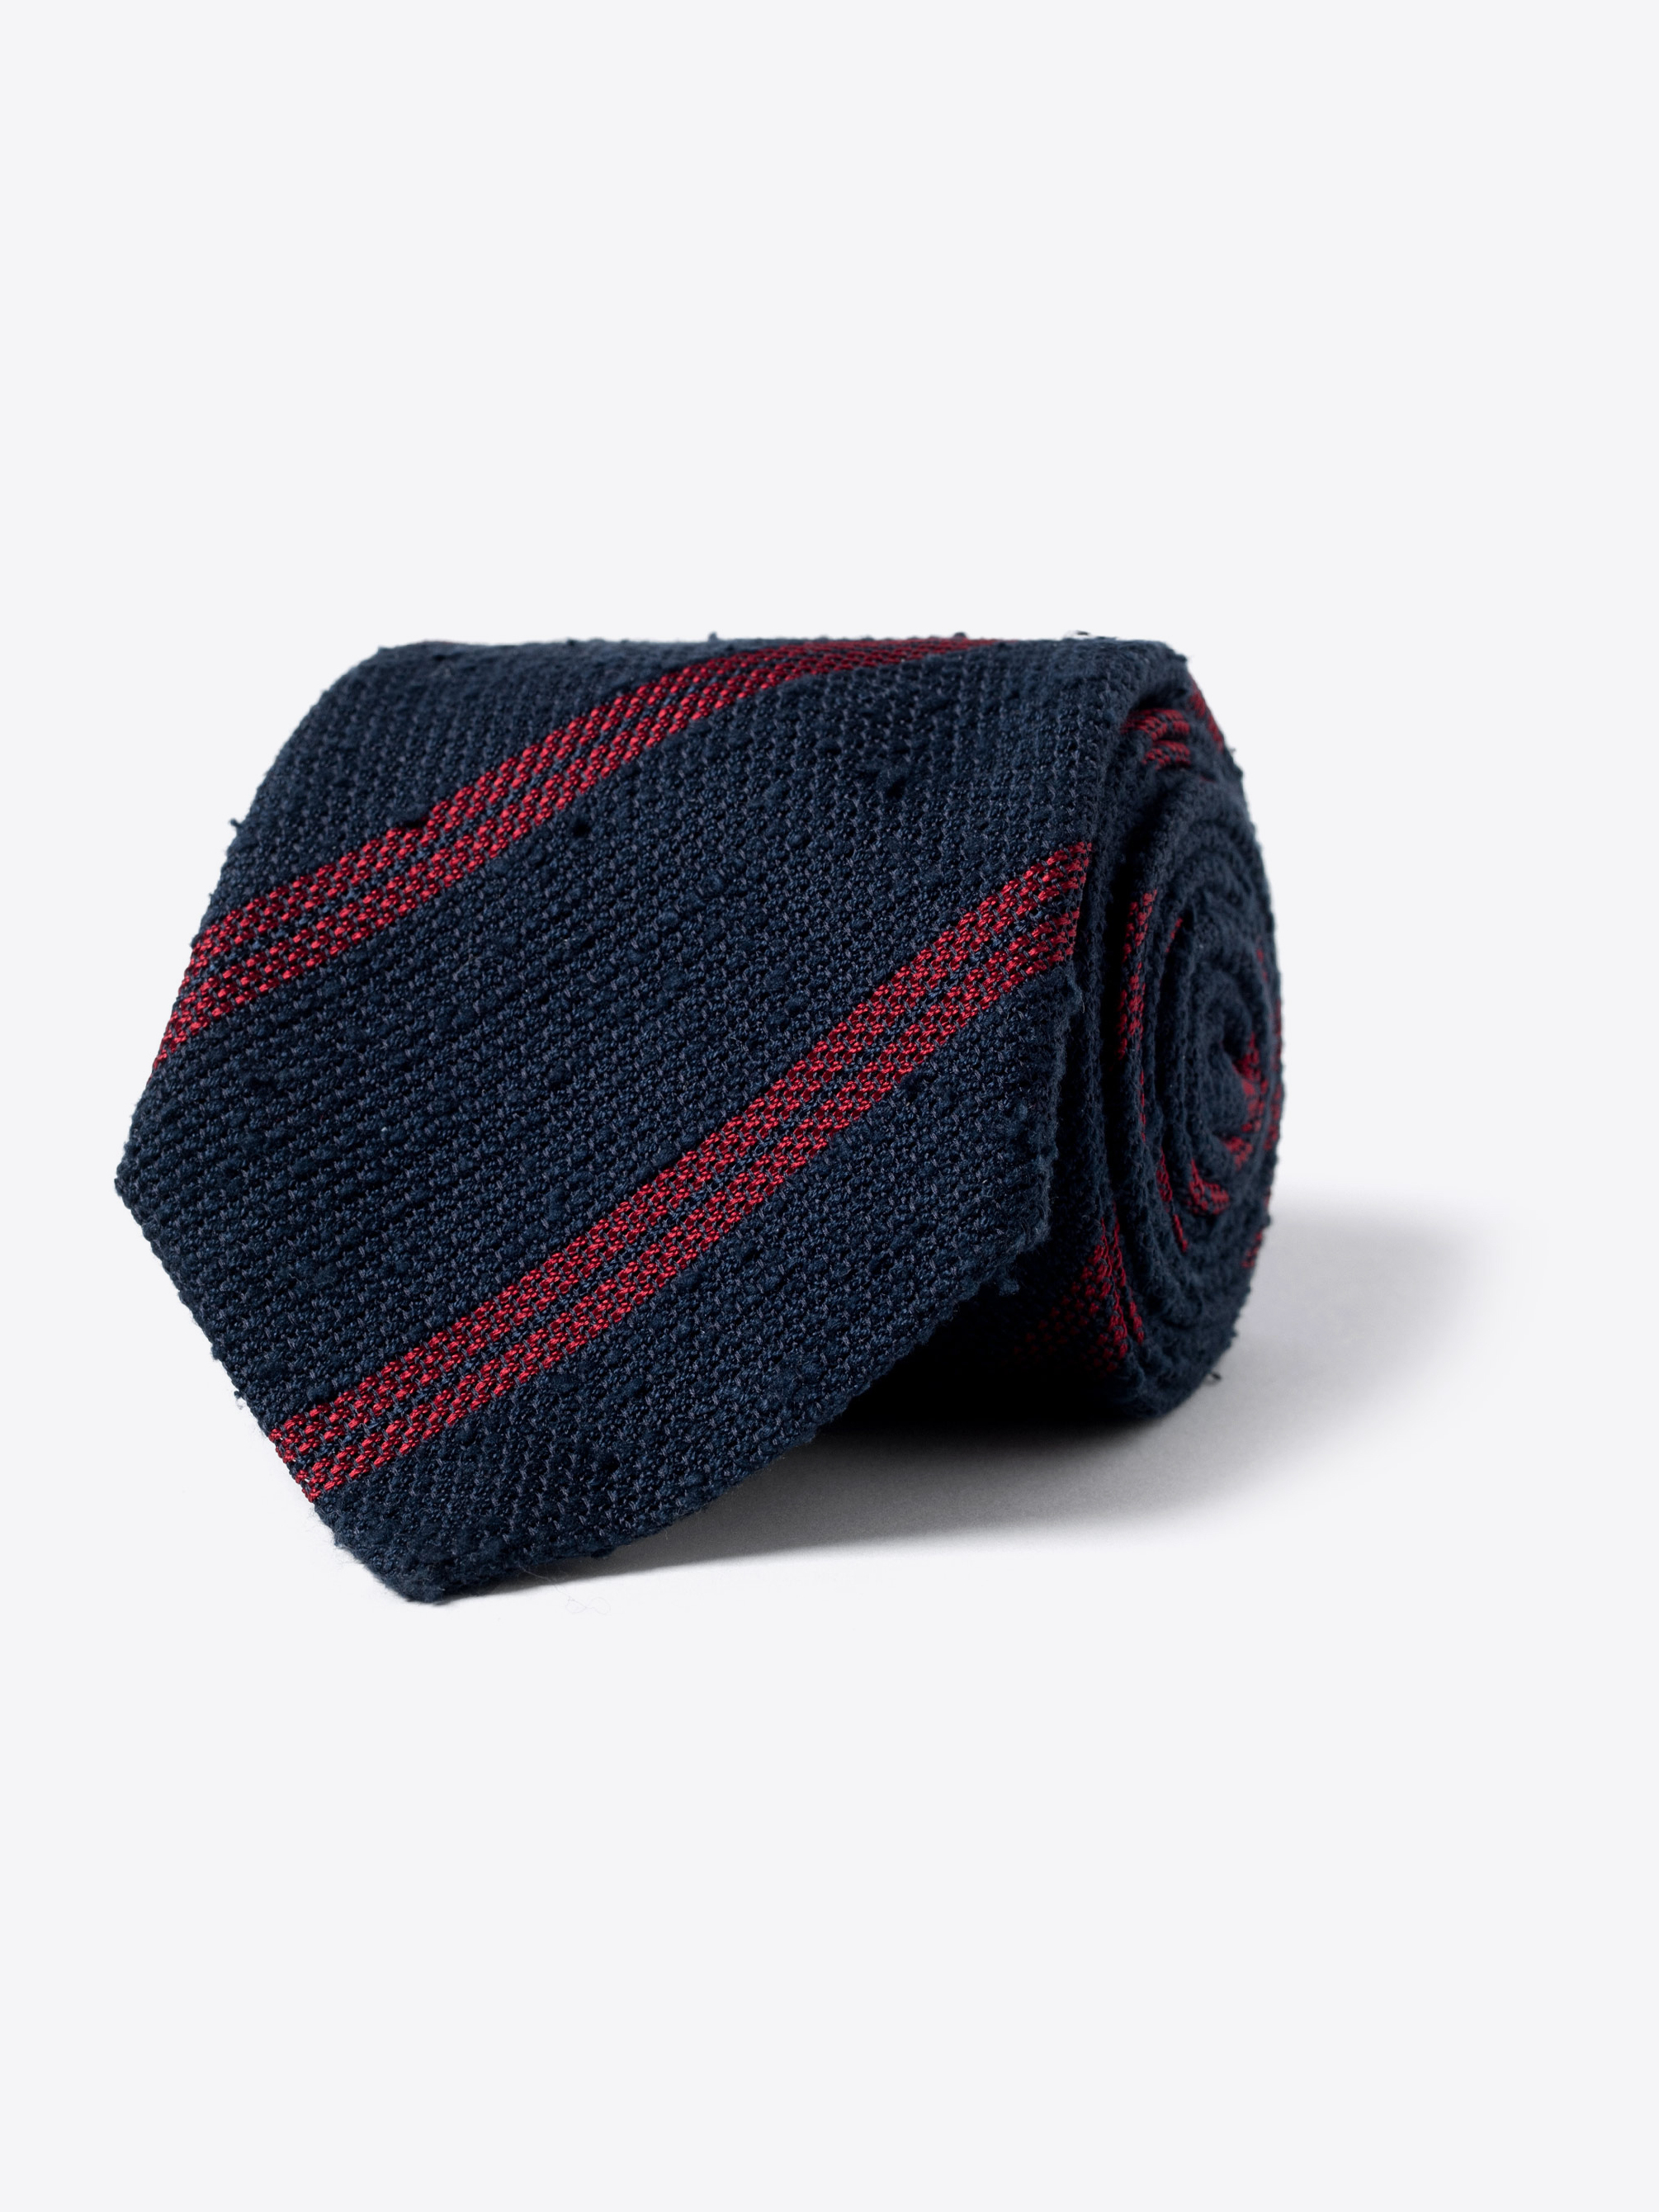 Zoom Image of Navy and Red Double Stripe Shantung Grenadine Tie